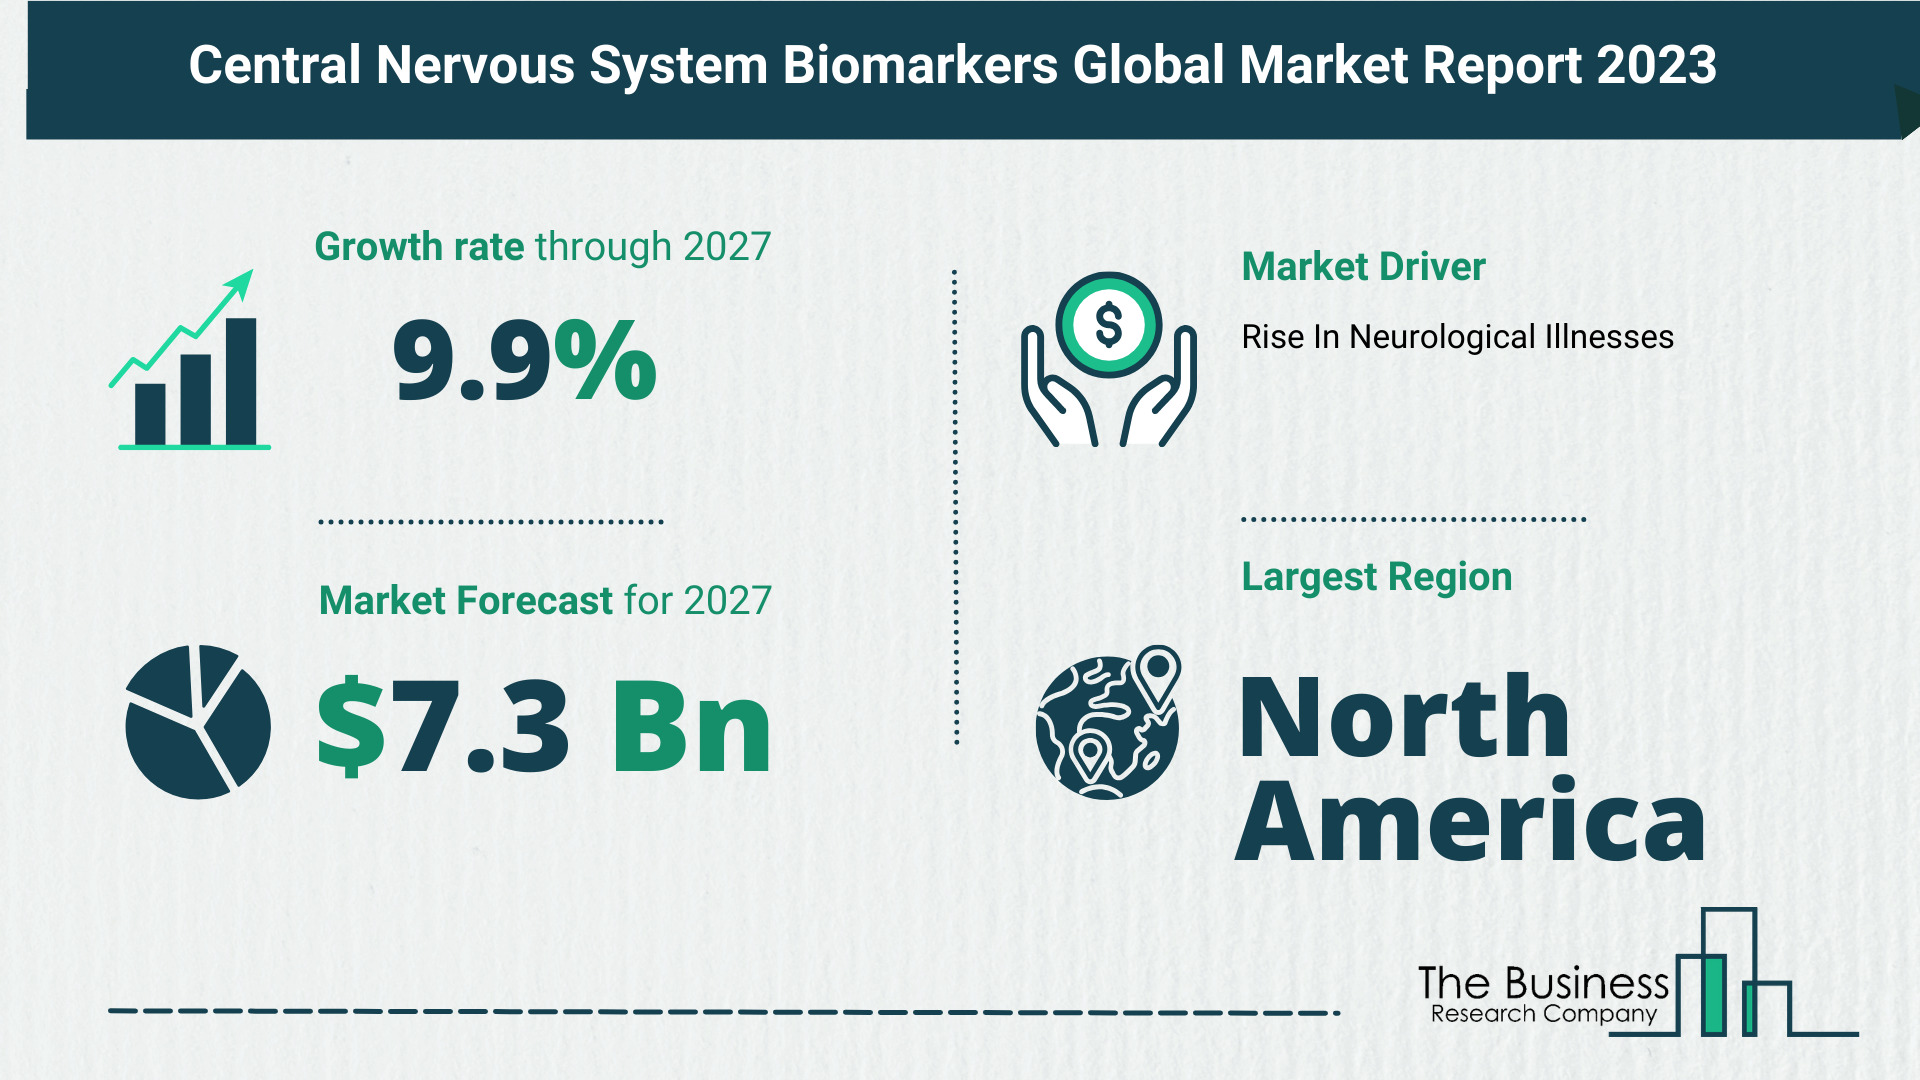 Key Insights On The Central Nervous System Biomarkers Market 2023 – Size, Driver, And Major Players